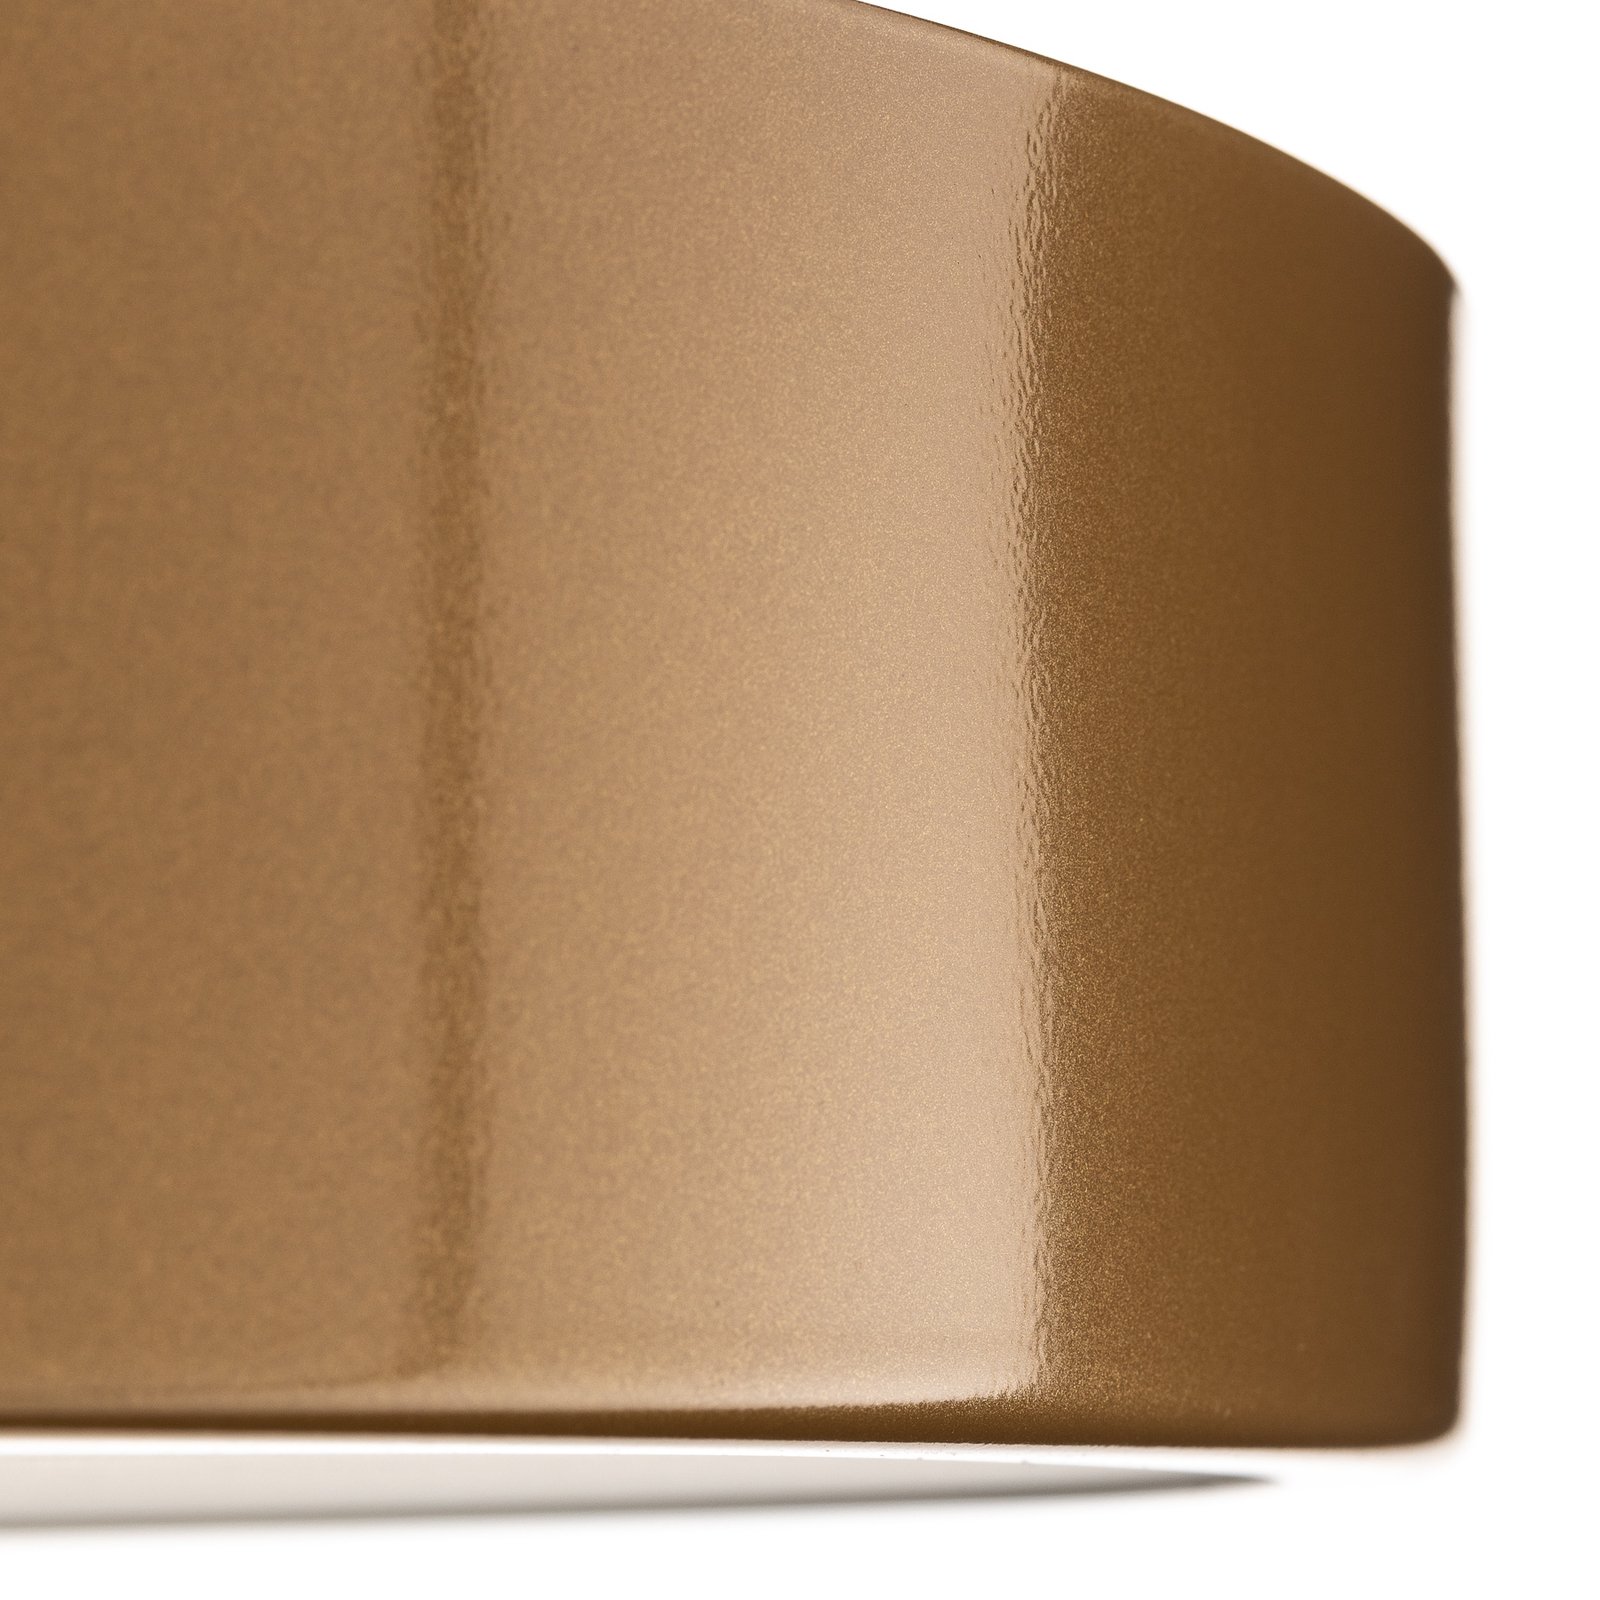 Cleo ceiling light in gold with diffuser, Ø 60 cm